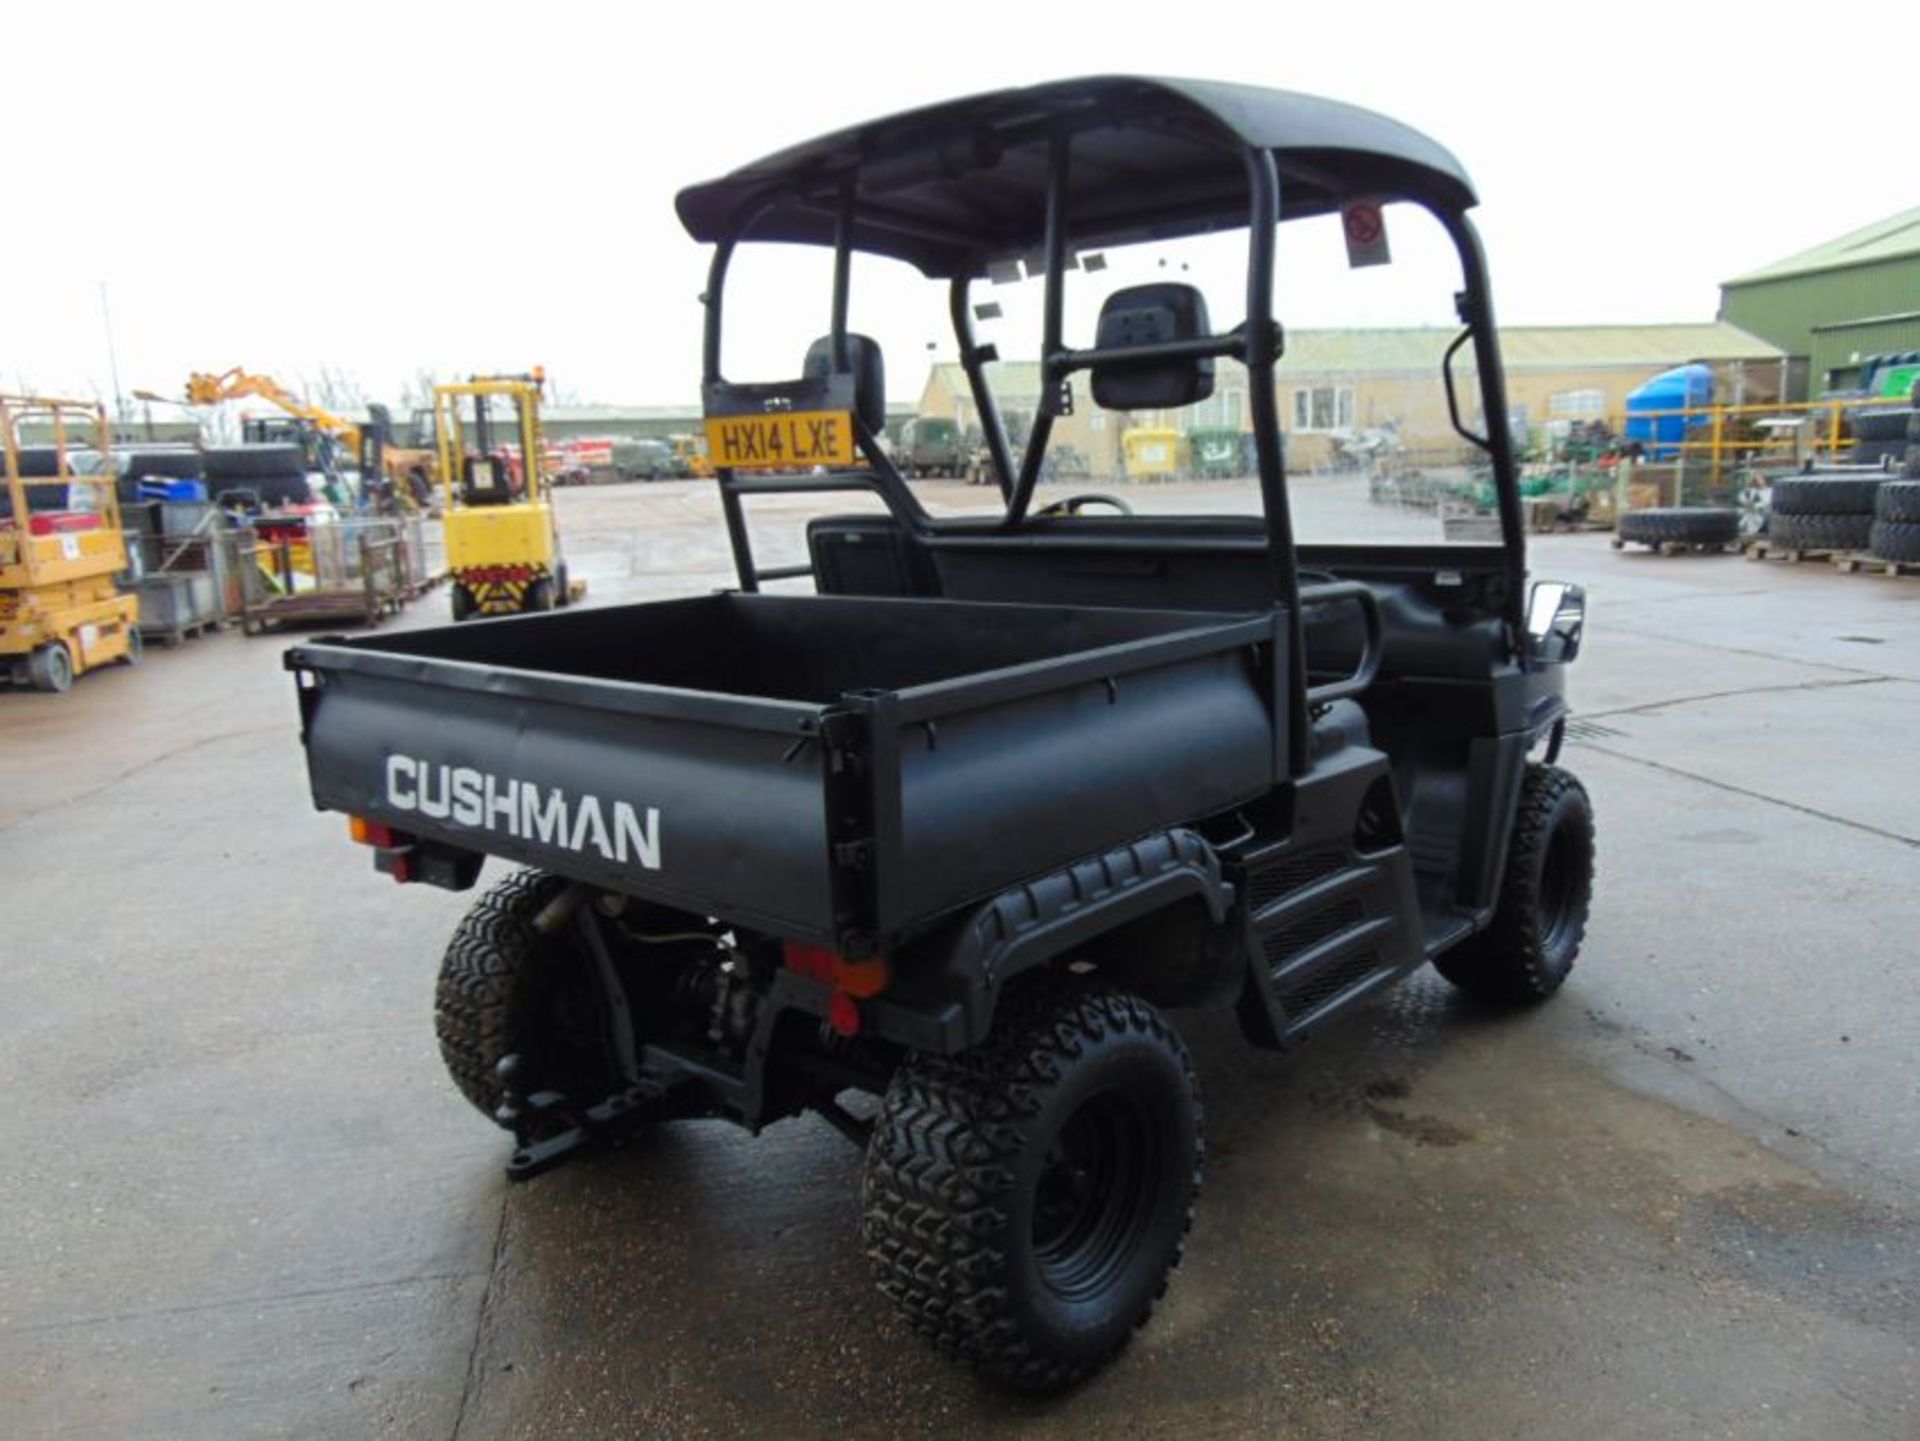 2014 Cushman XD1600 4x4 Diesel Utility Vehicle Showing 1104 hrs - Image 6 of 25